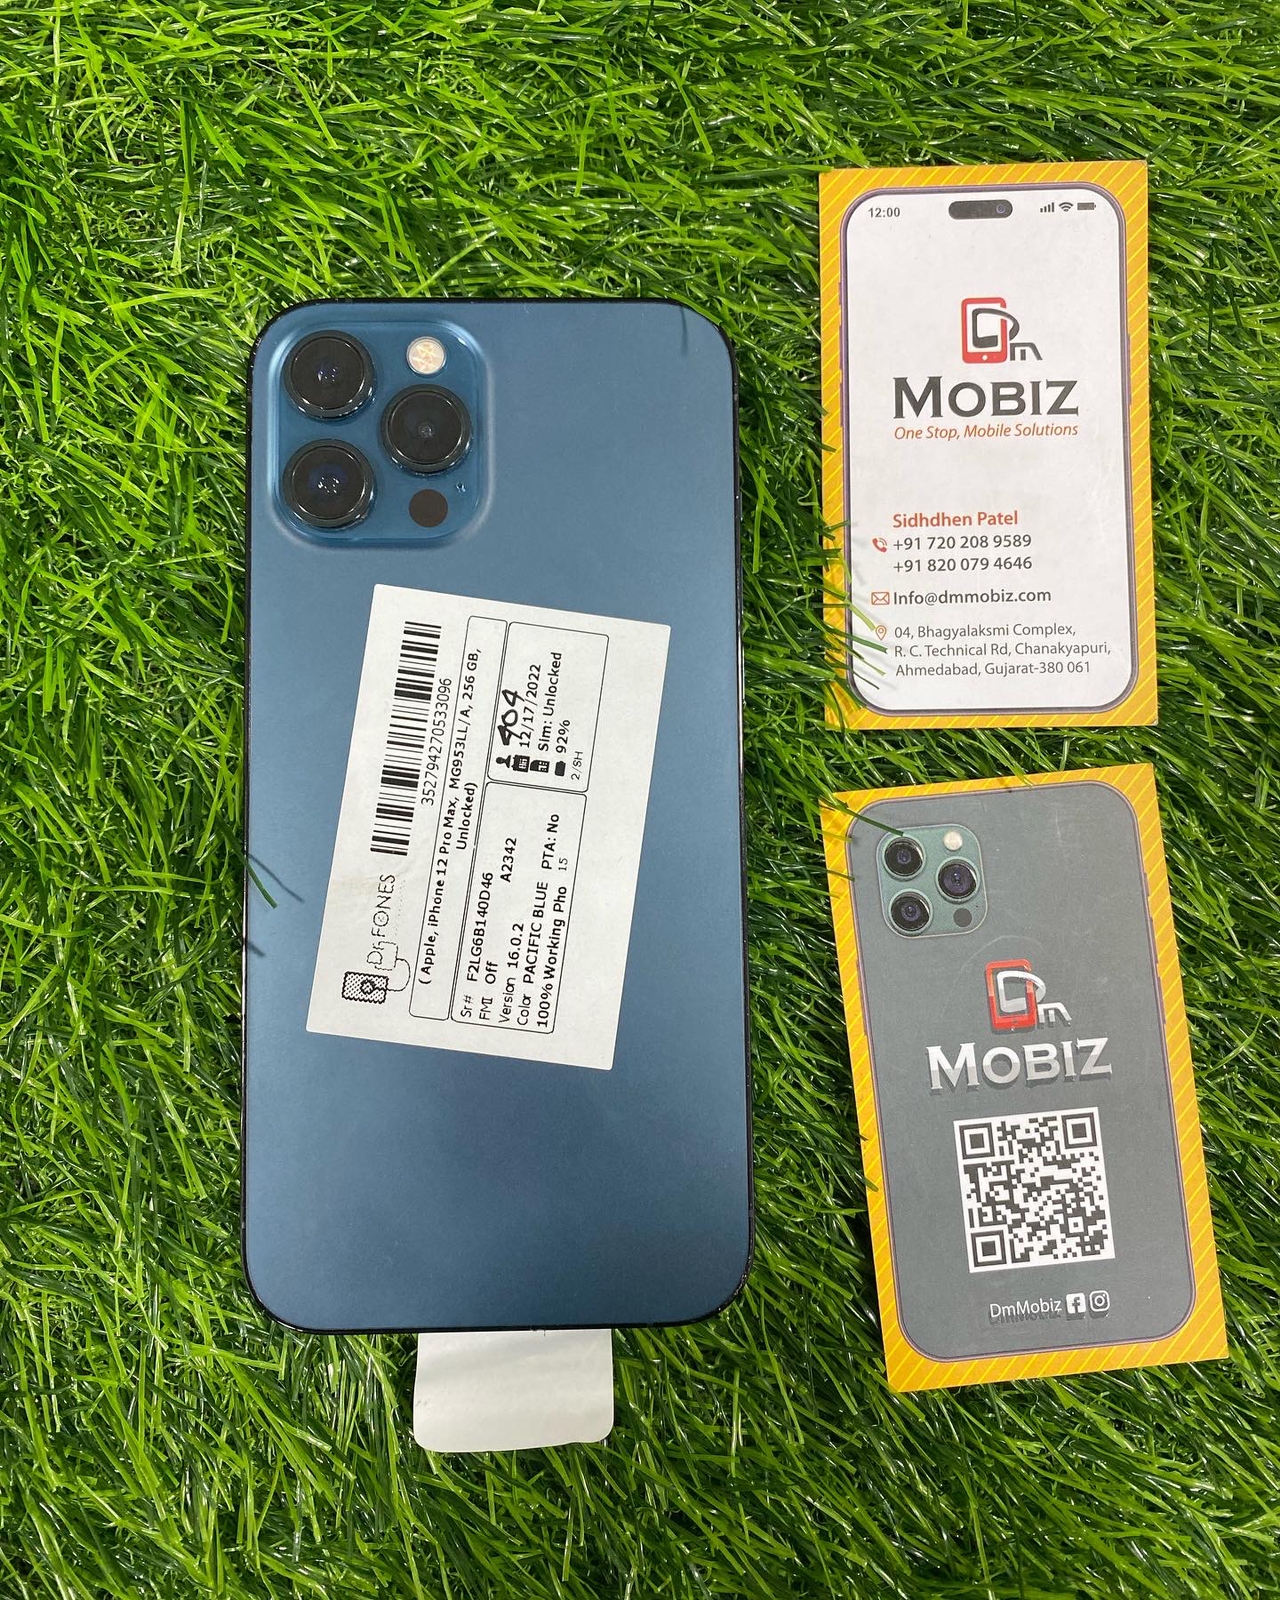 Details View - I phone 12 pro max photos - iphone 12 pro max price in india,apple iphone 12 pro max features,buy iphone 12 pro max online,best deals on iphone 12 pro max,apple store warranty for iphone 12 pro max,emi options for iphone 12 pro max,iphone 12 pro max specifications,iphone 12 pro max 256gb,sleek design of iphone 12 pro max,brand new iphone 12 pro max,reseller bazzar